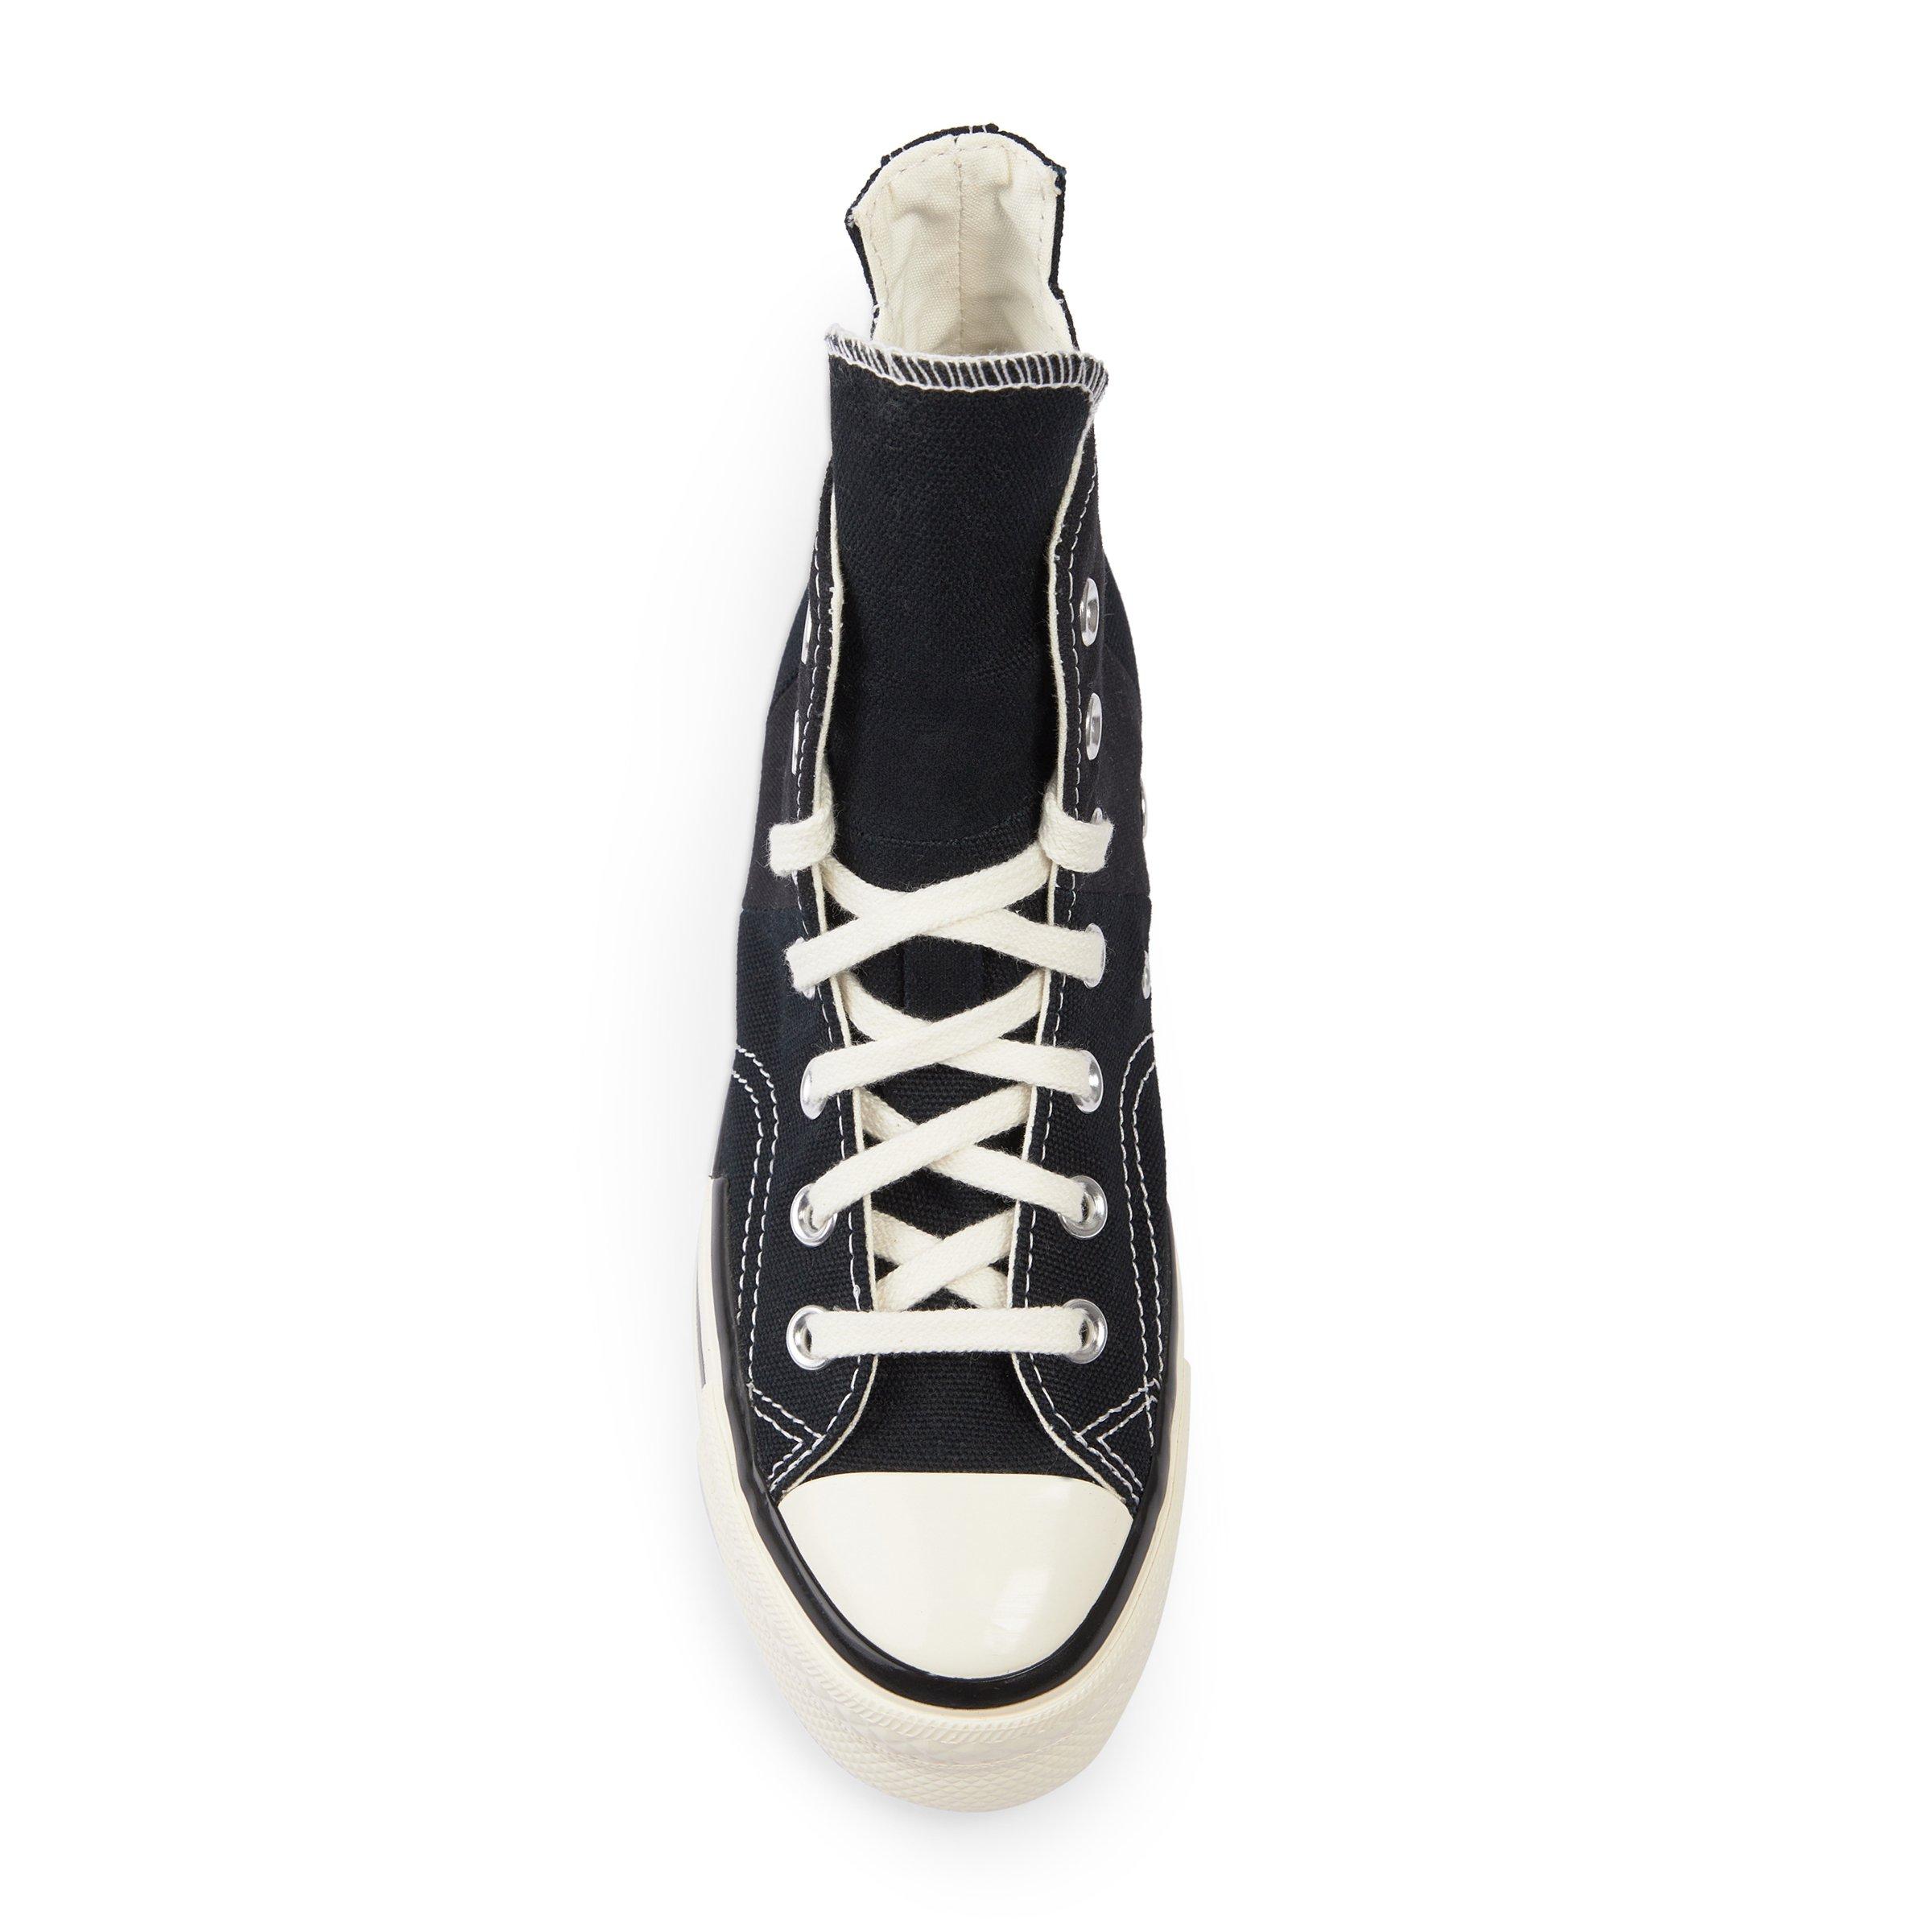 Chuck 70 Plus canvas high-top sneakers